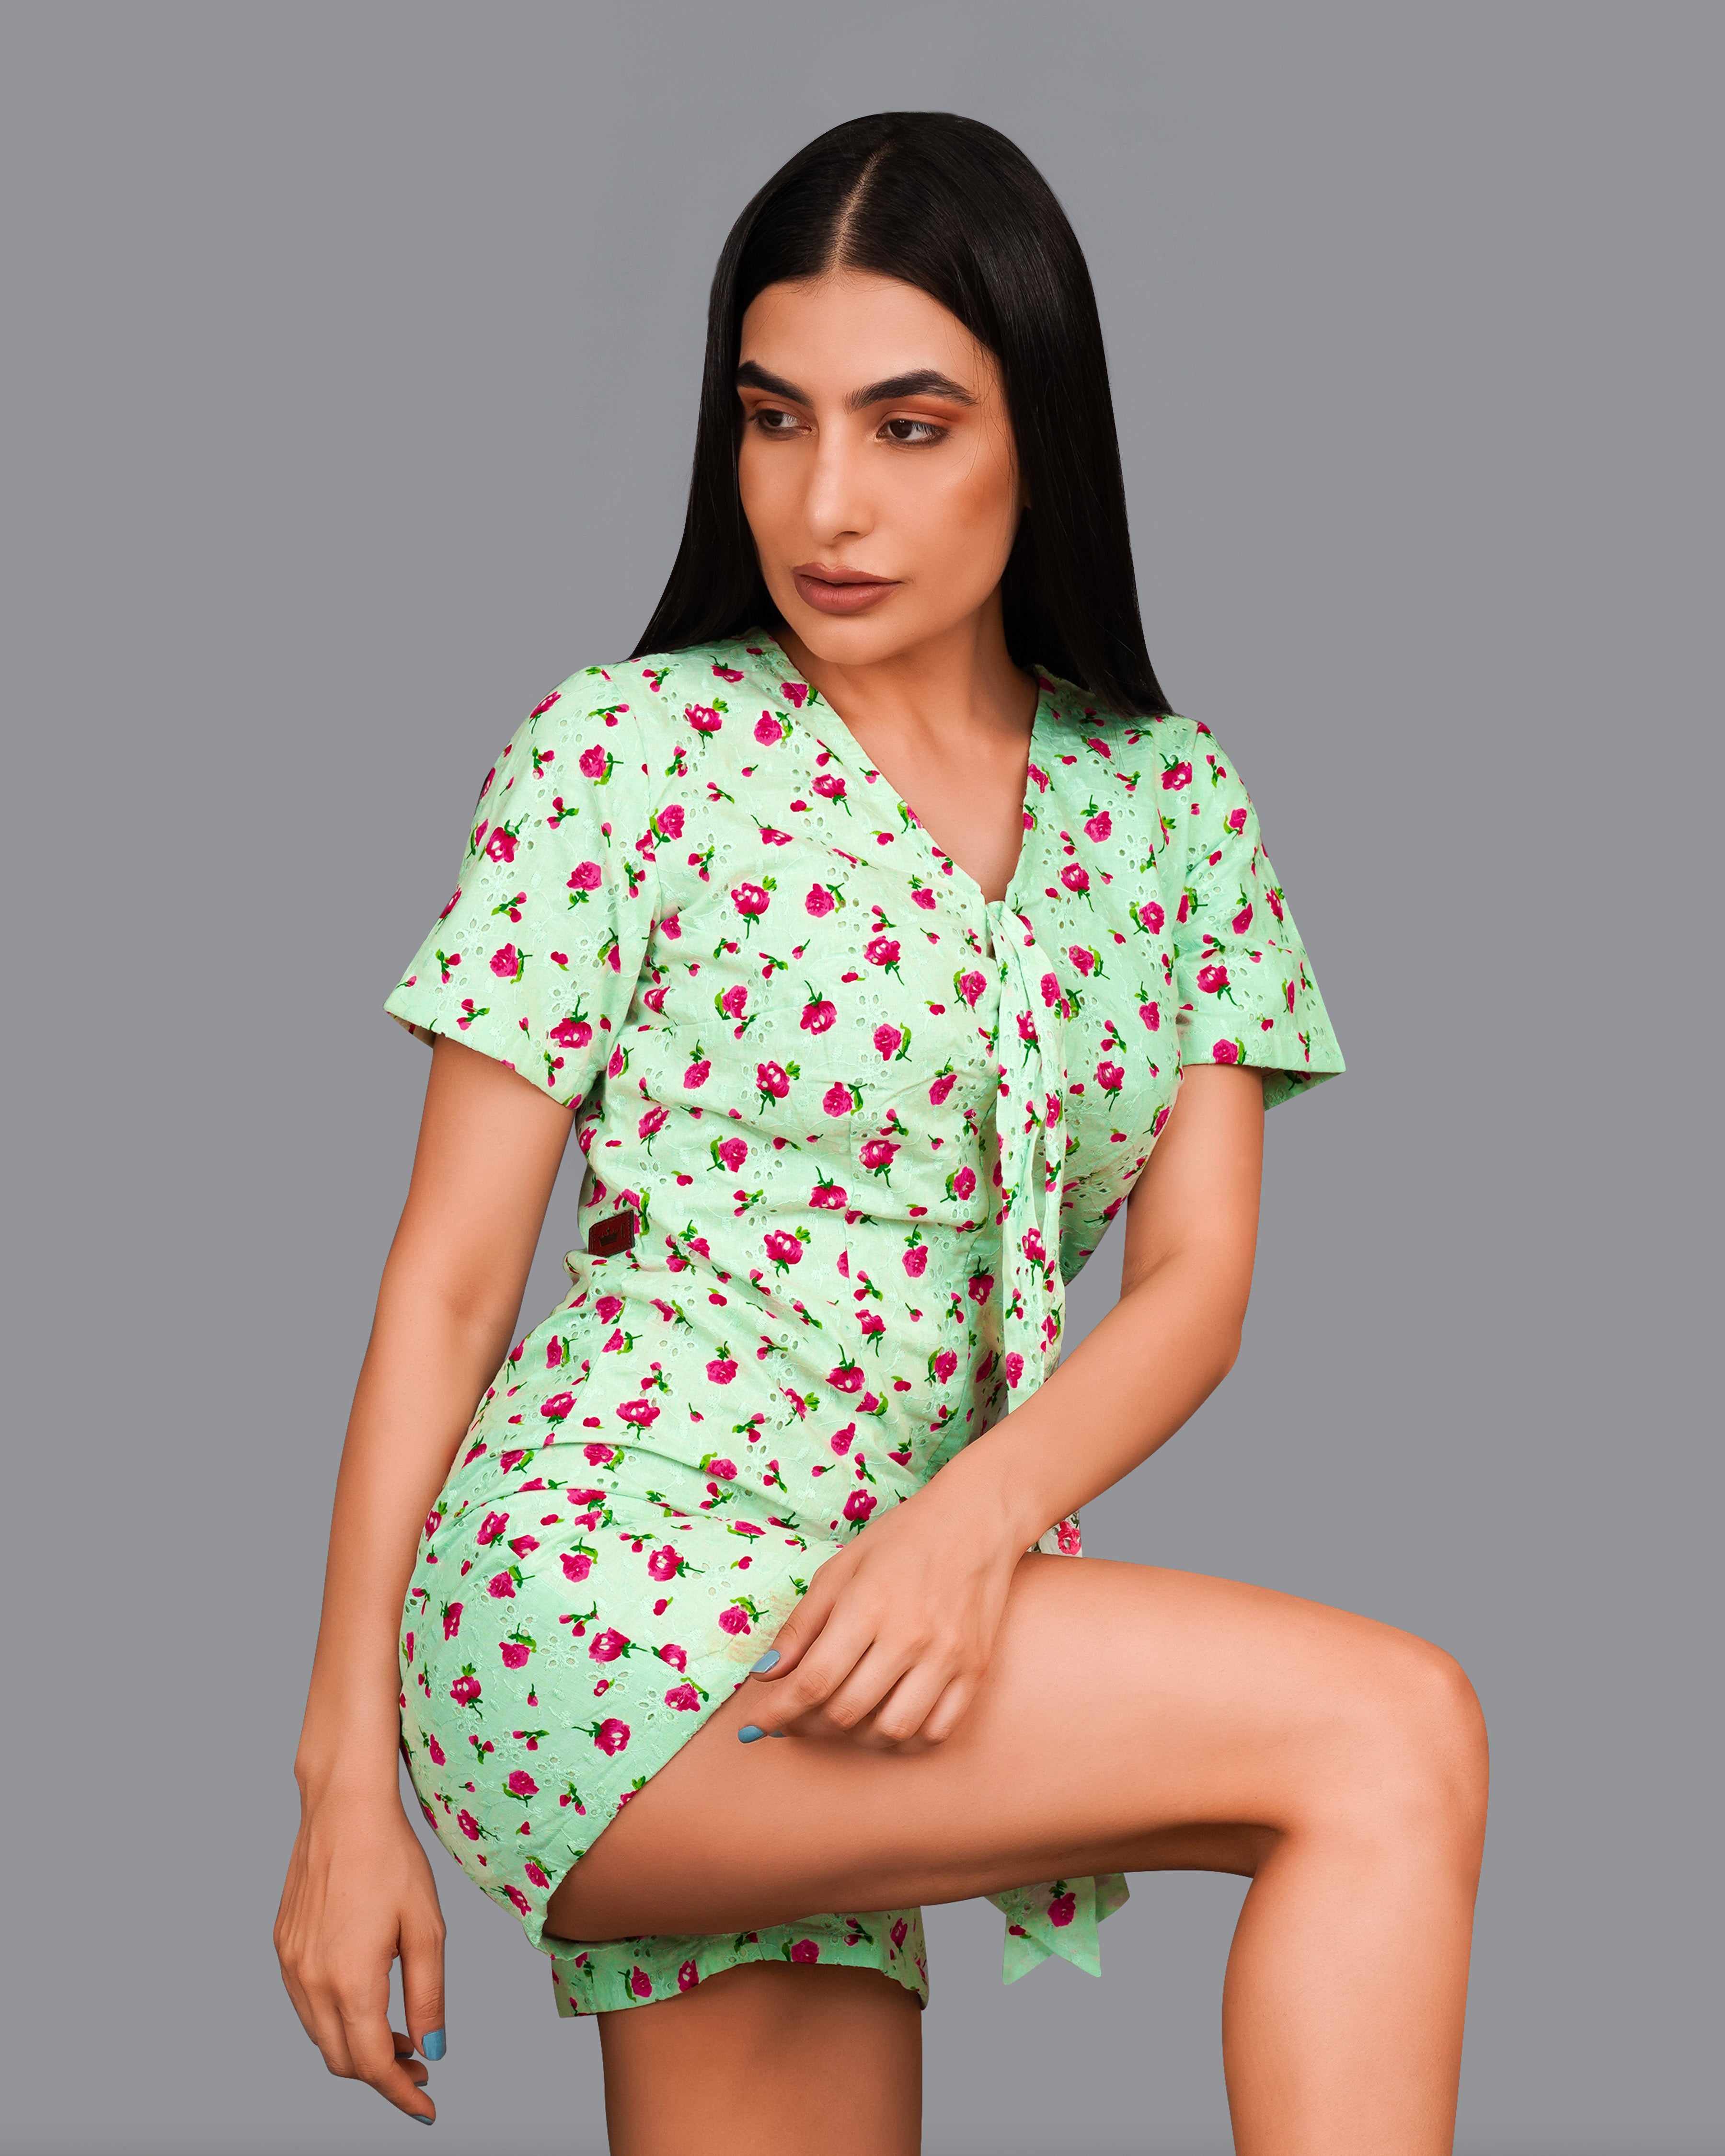 Celadon Green Rose Printed Premium Cotton Jumpsuit WD008-32, WD008-34, WD008-36, WD008-38, WD008-40, WD008-42 